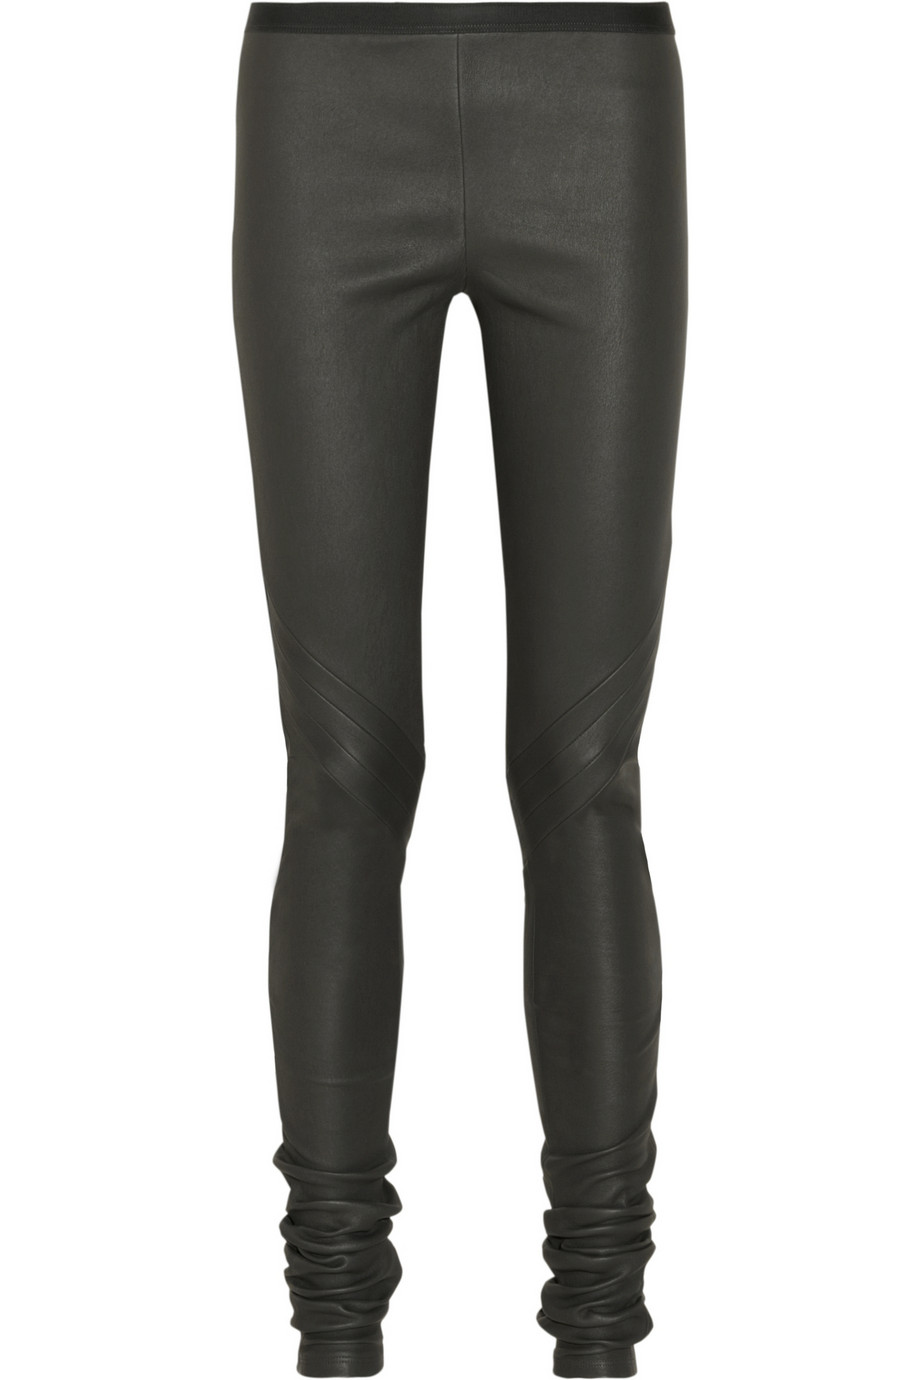 10 best leather pants to buy now and wear forever | the CITIZENS 